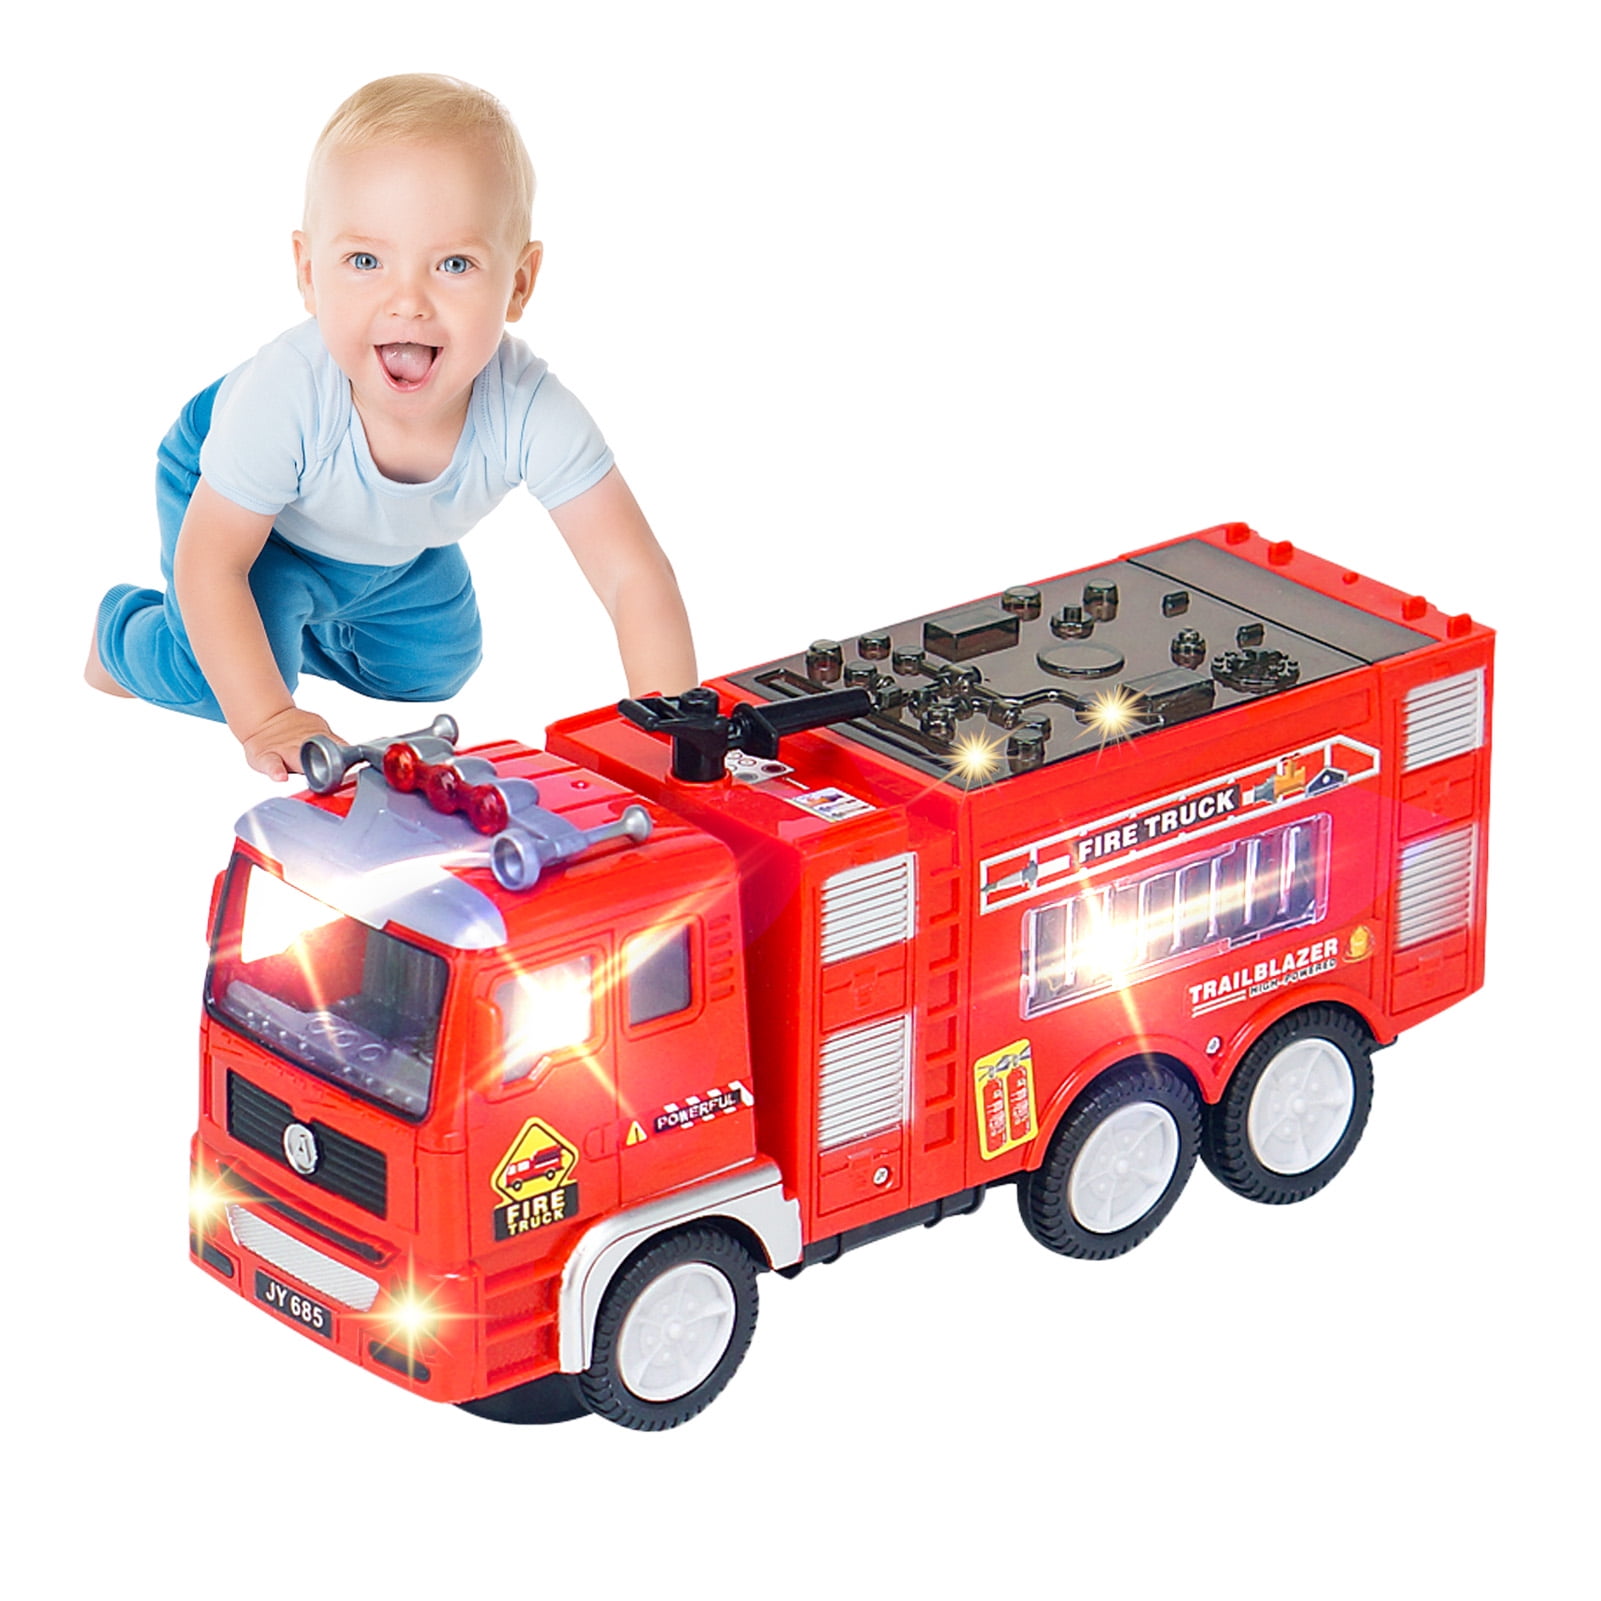 Shulemin Electric Fire Truck Toy Great